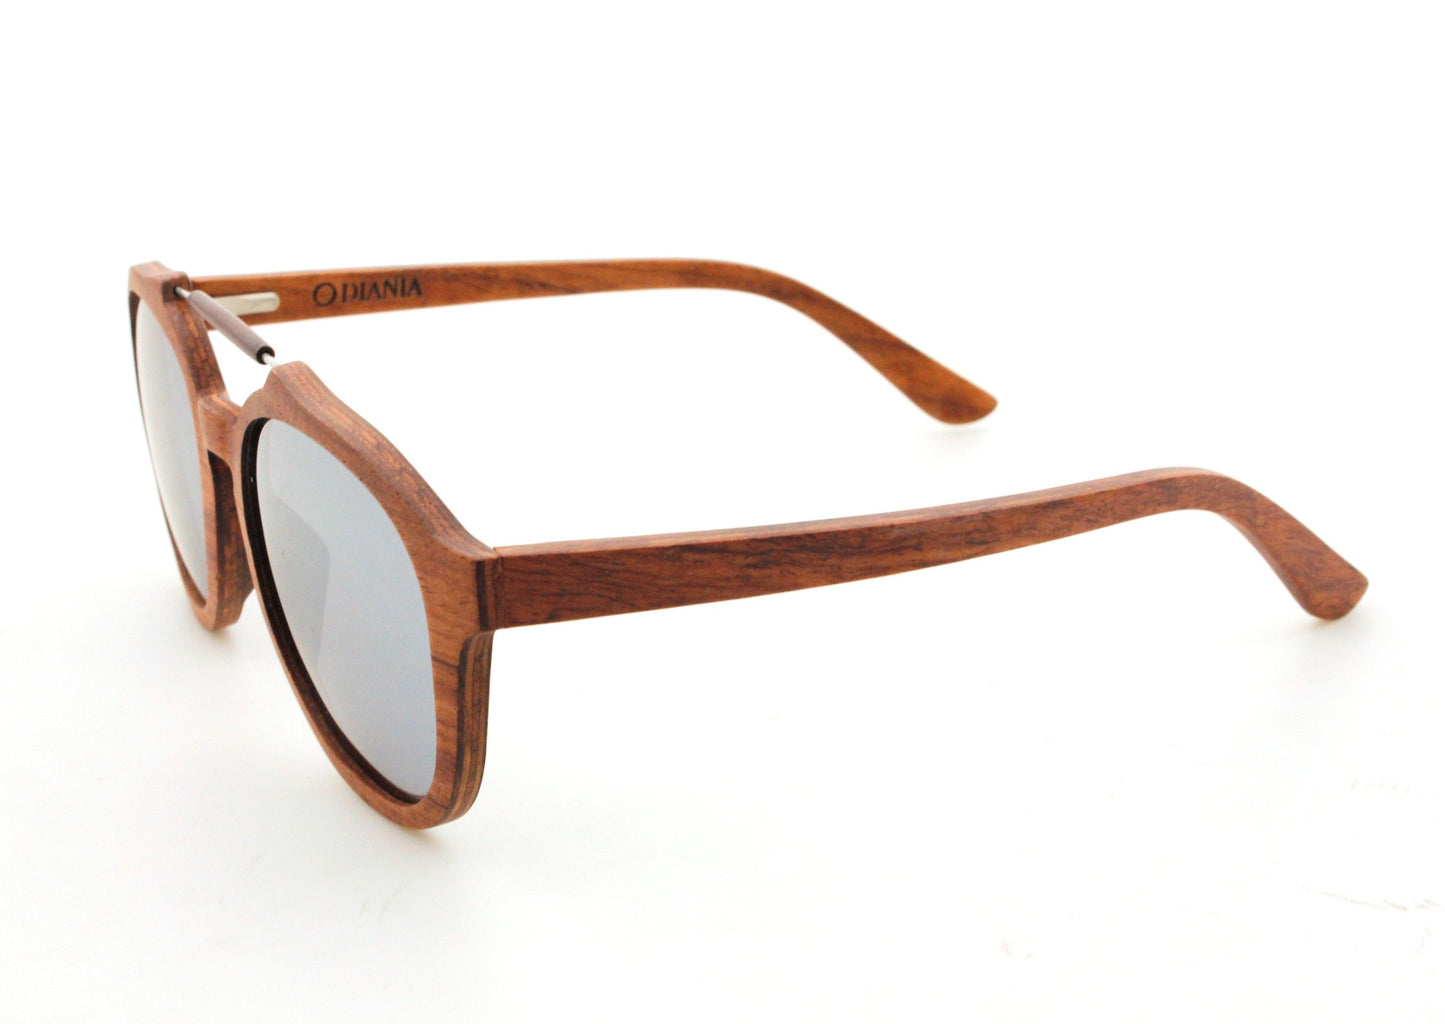 Barcella bubinga wood sunglasses view from the left